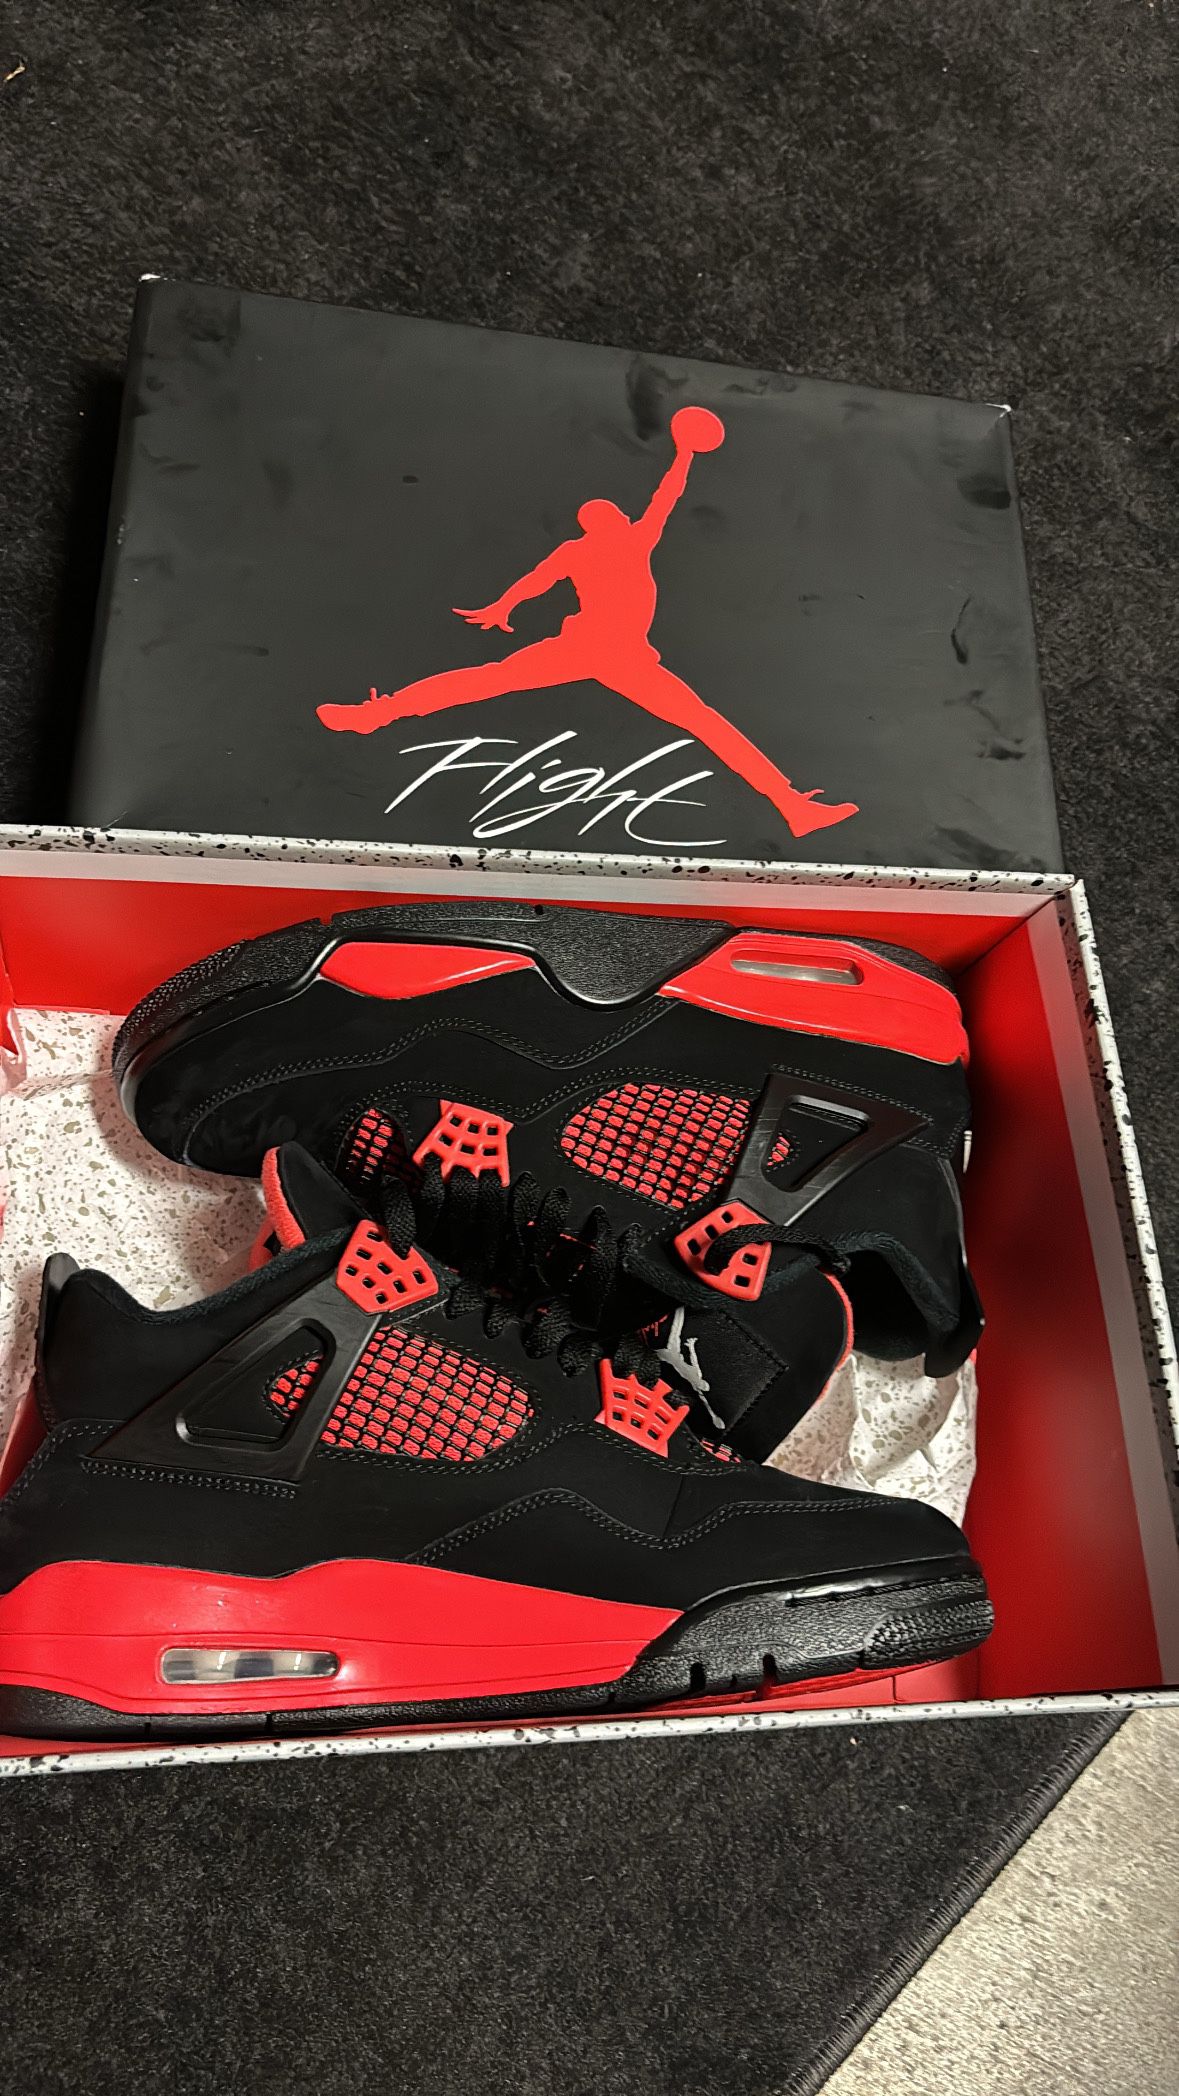 Jordan 4 red thunder size 8.5 8.9/10 condo, still has insole stickers! $413 on stock x